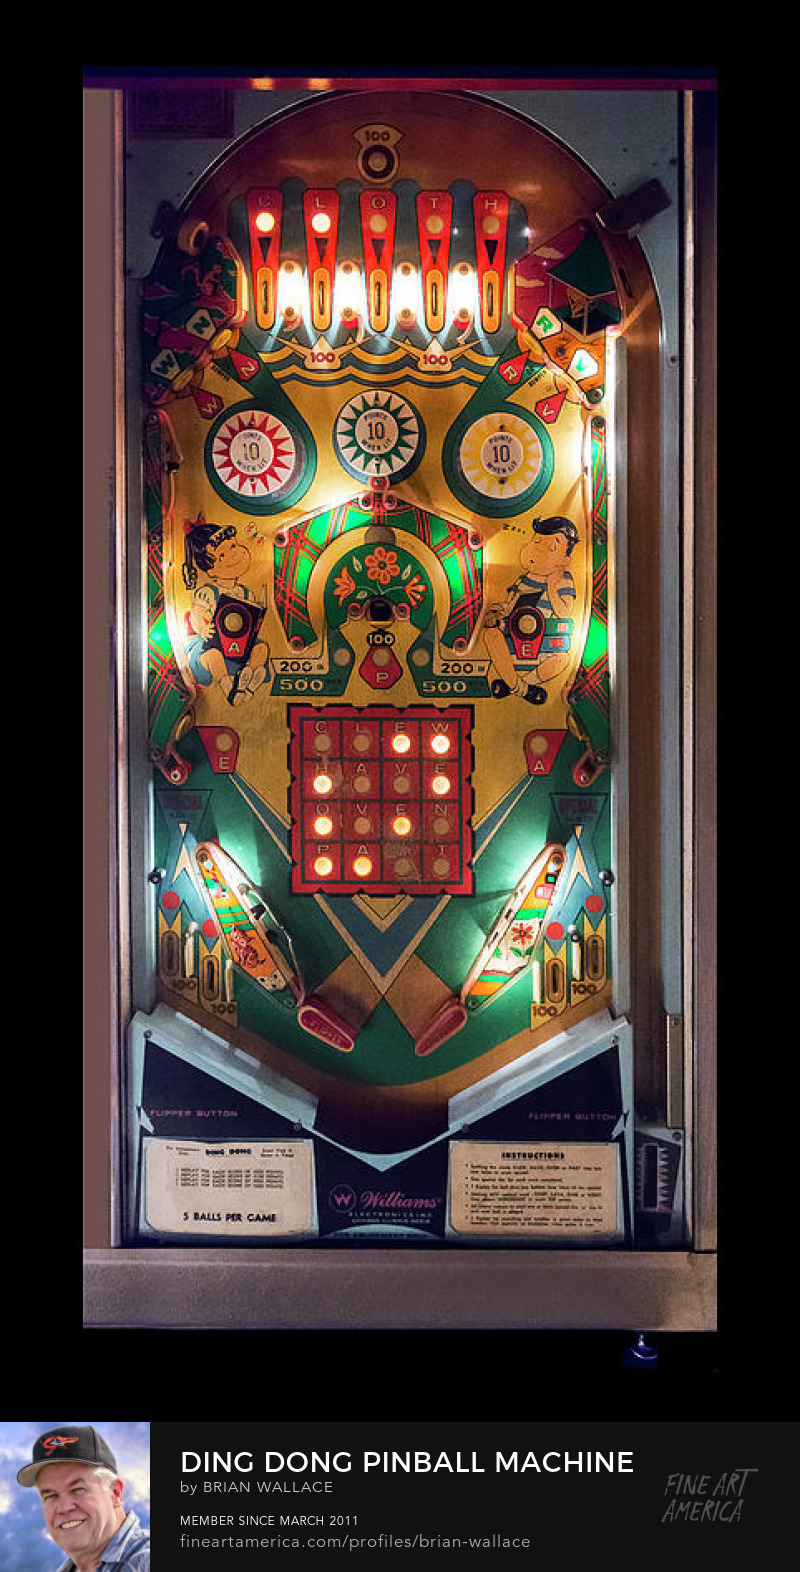 Ding Dong Pinball Machine by Brian Wallace